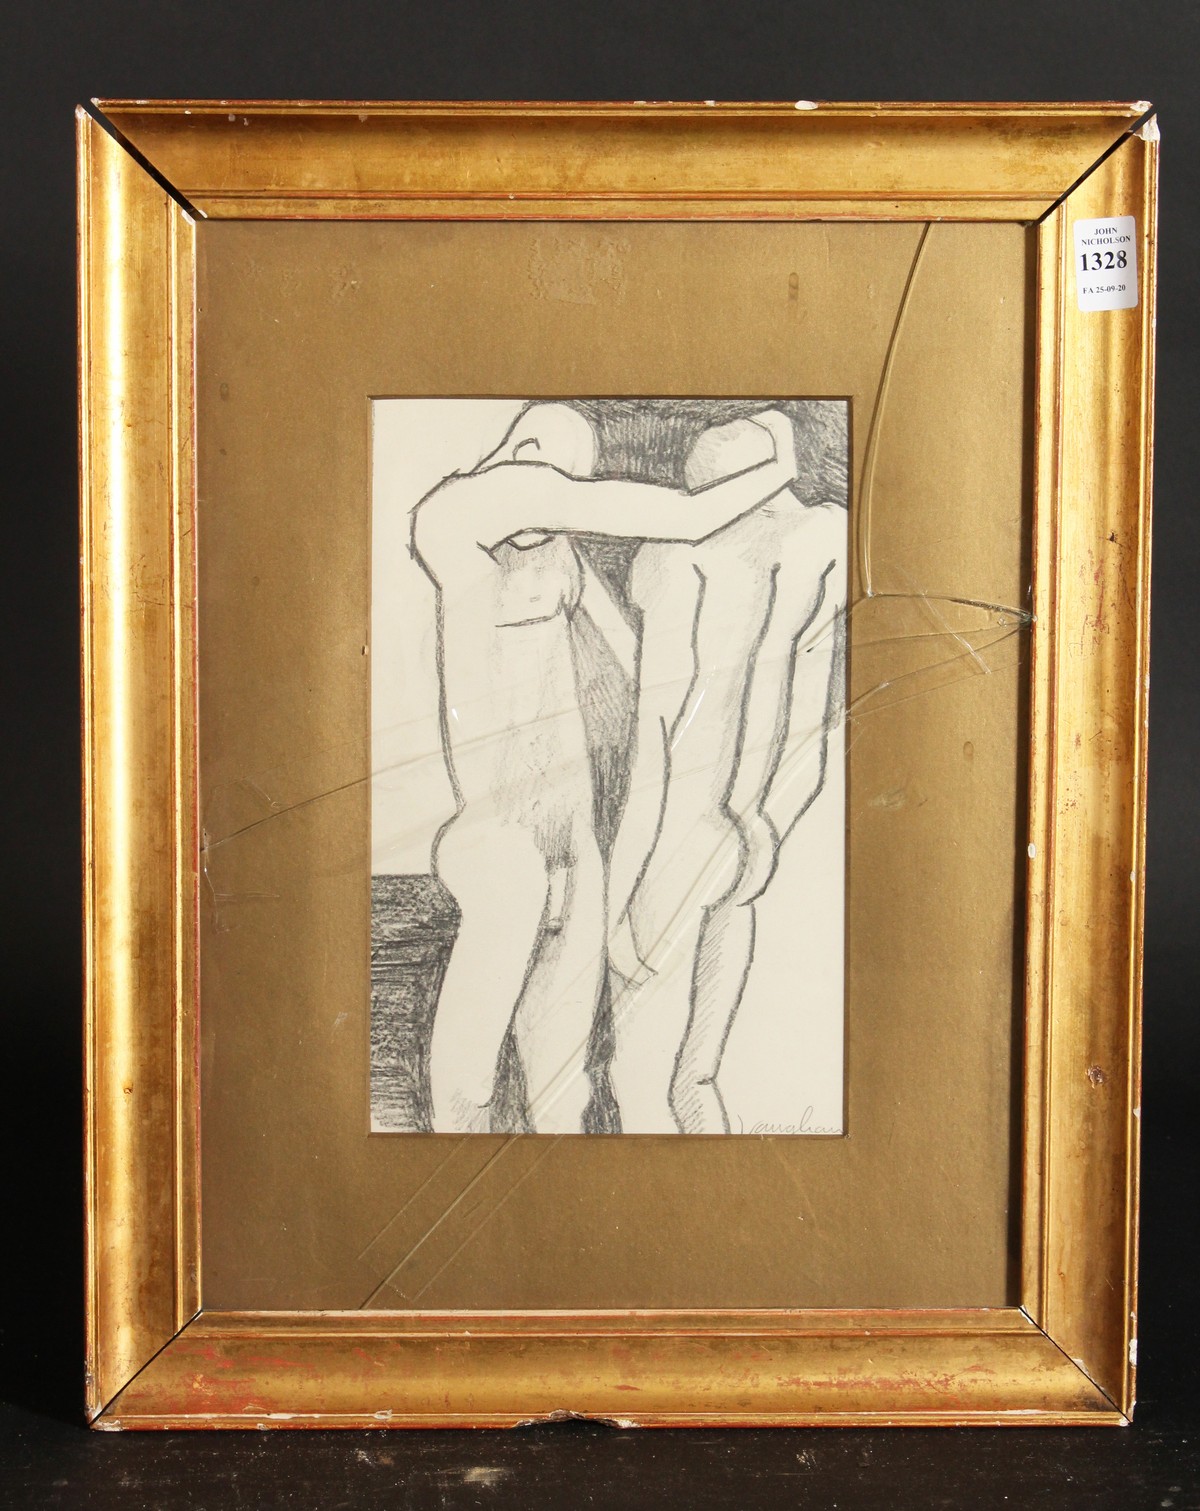 20th Century British School. A Pencil Sketch of Two Male Nudes, Signed Vaughan. 10" x 6". - Image 2 of 3